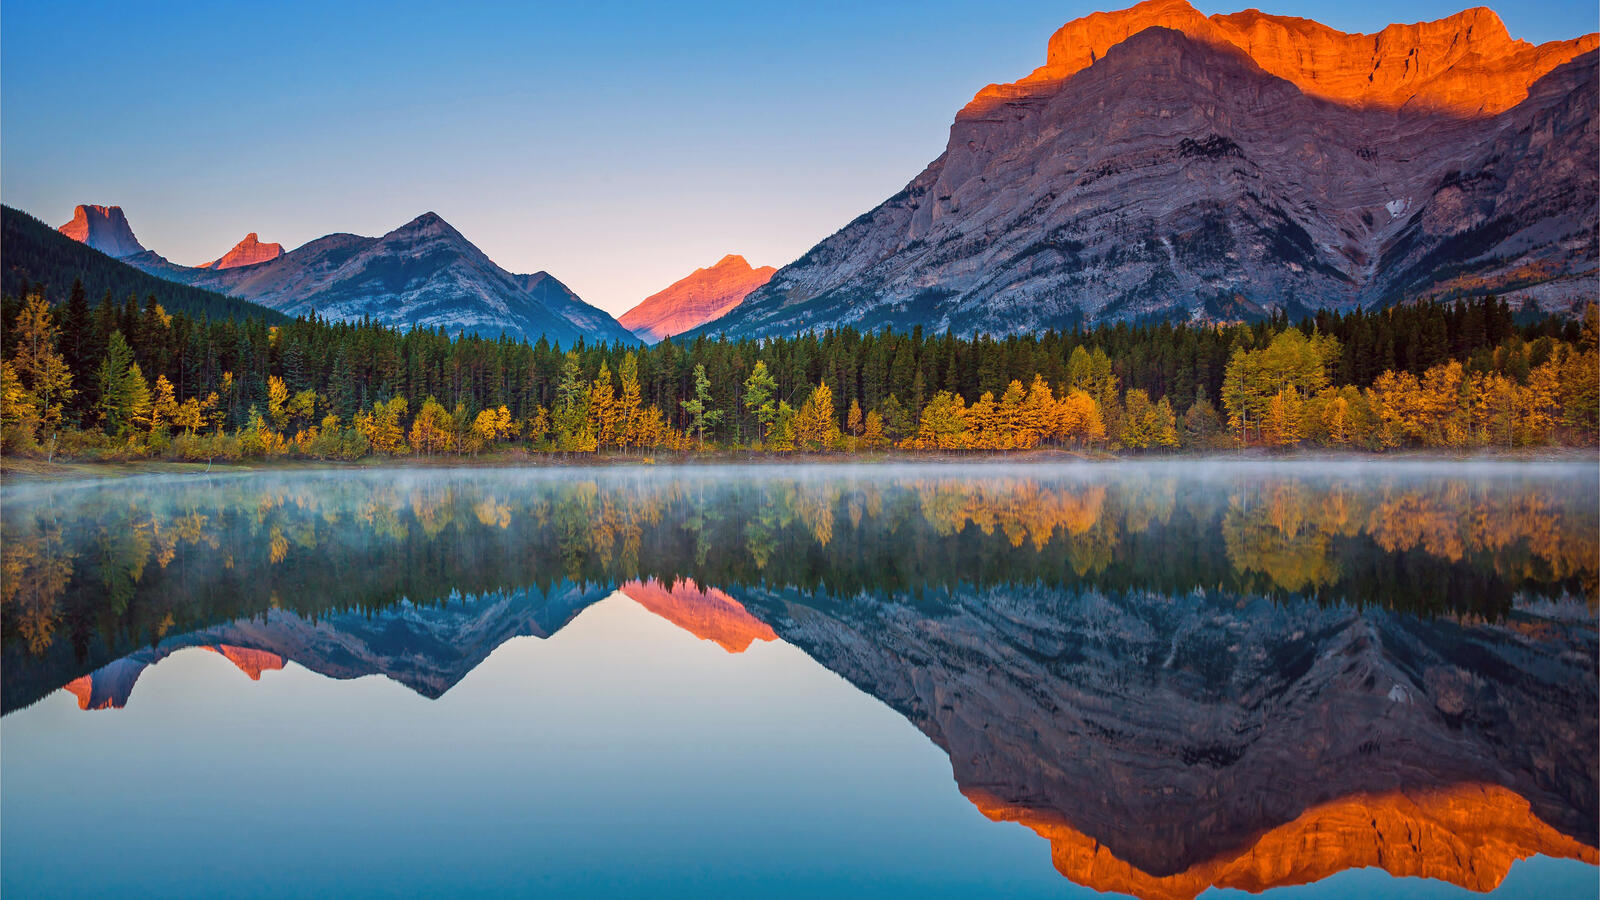 Wallpapers lake landscapes mountains on the desktop